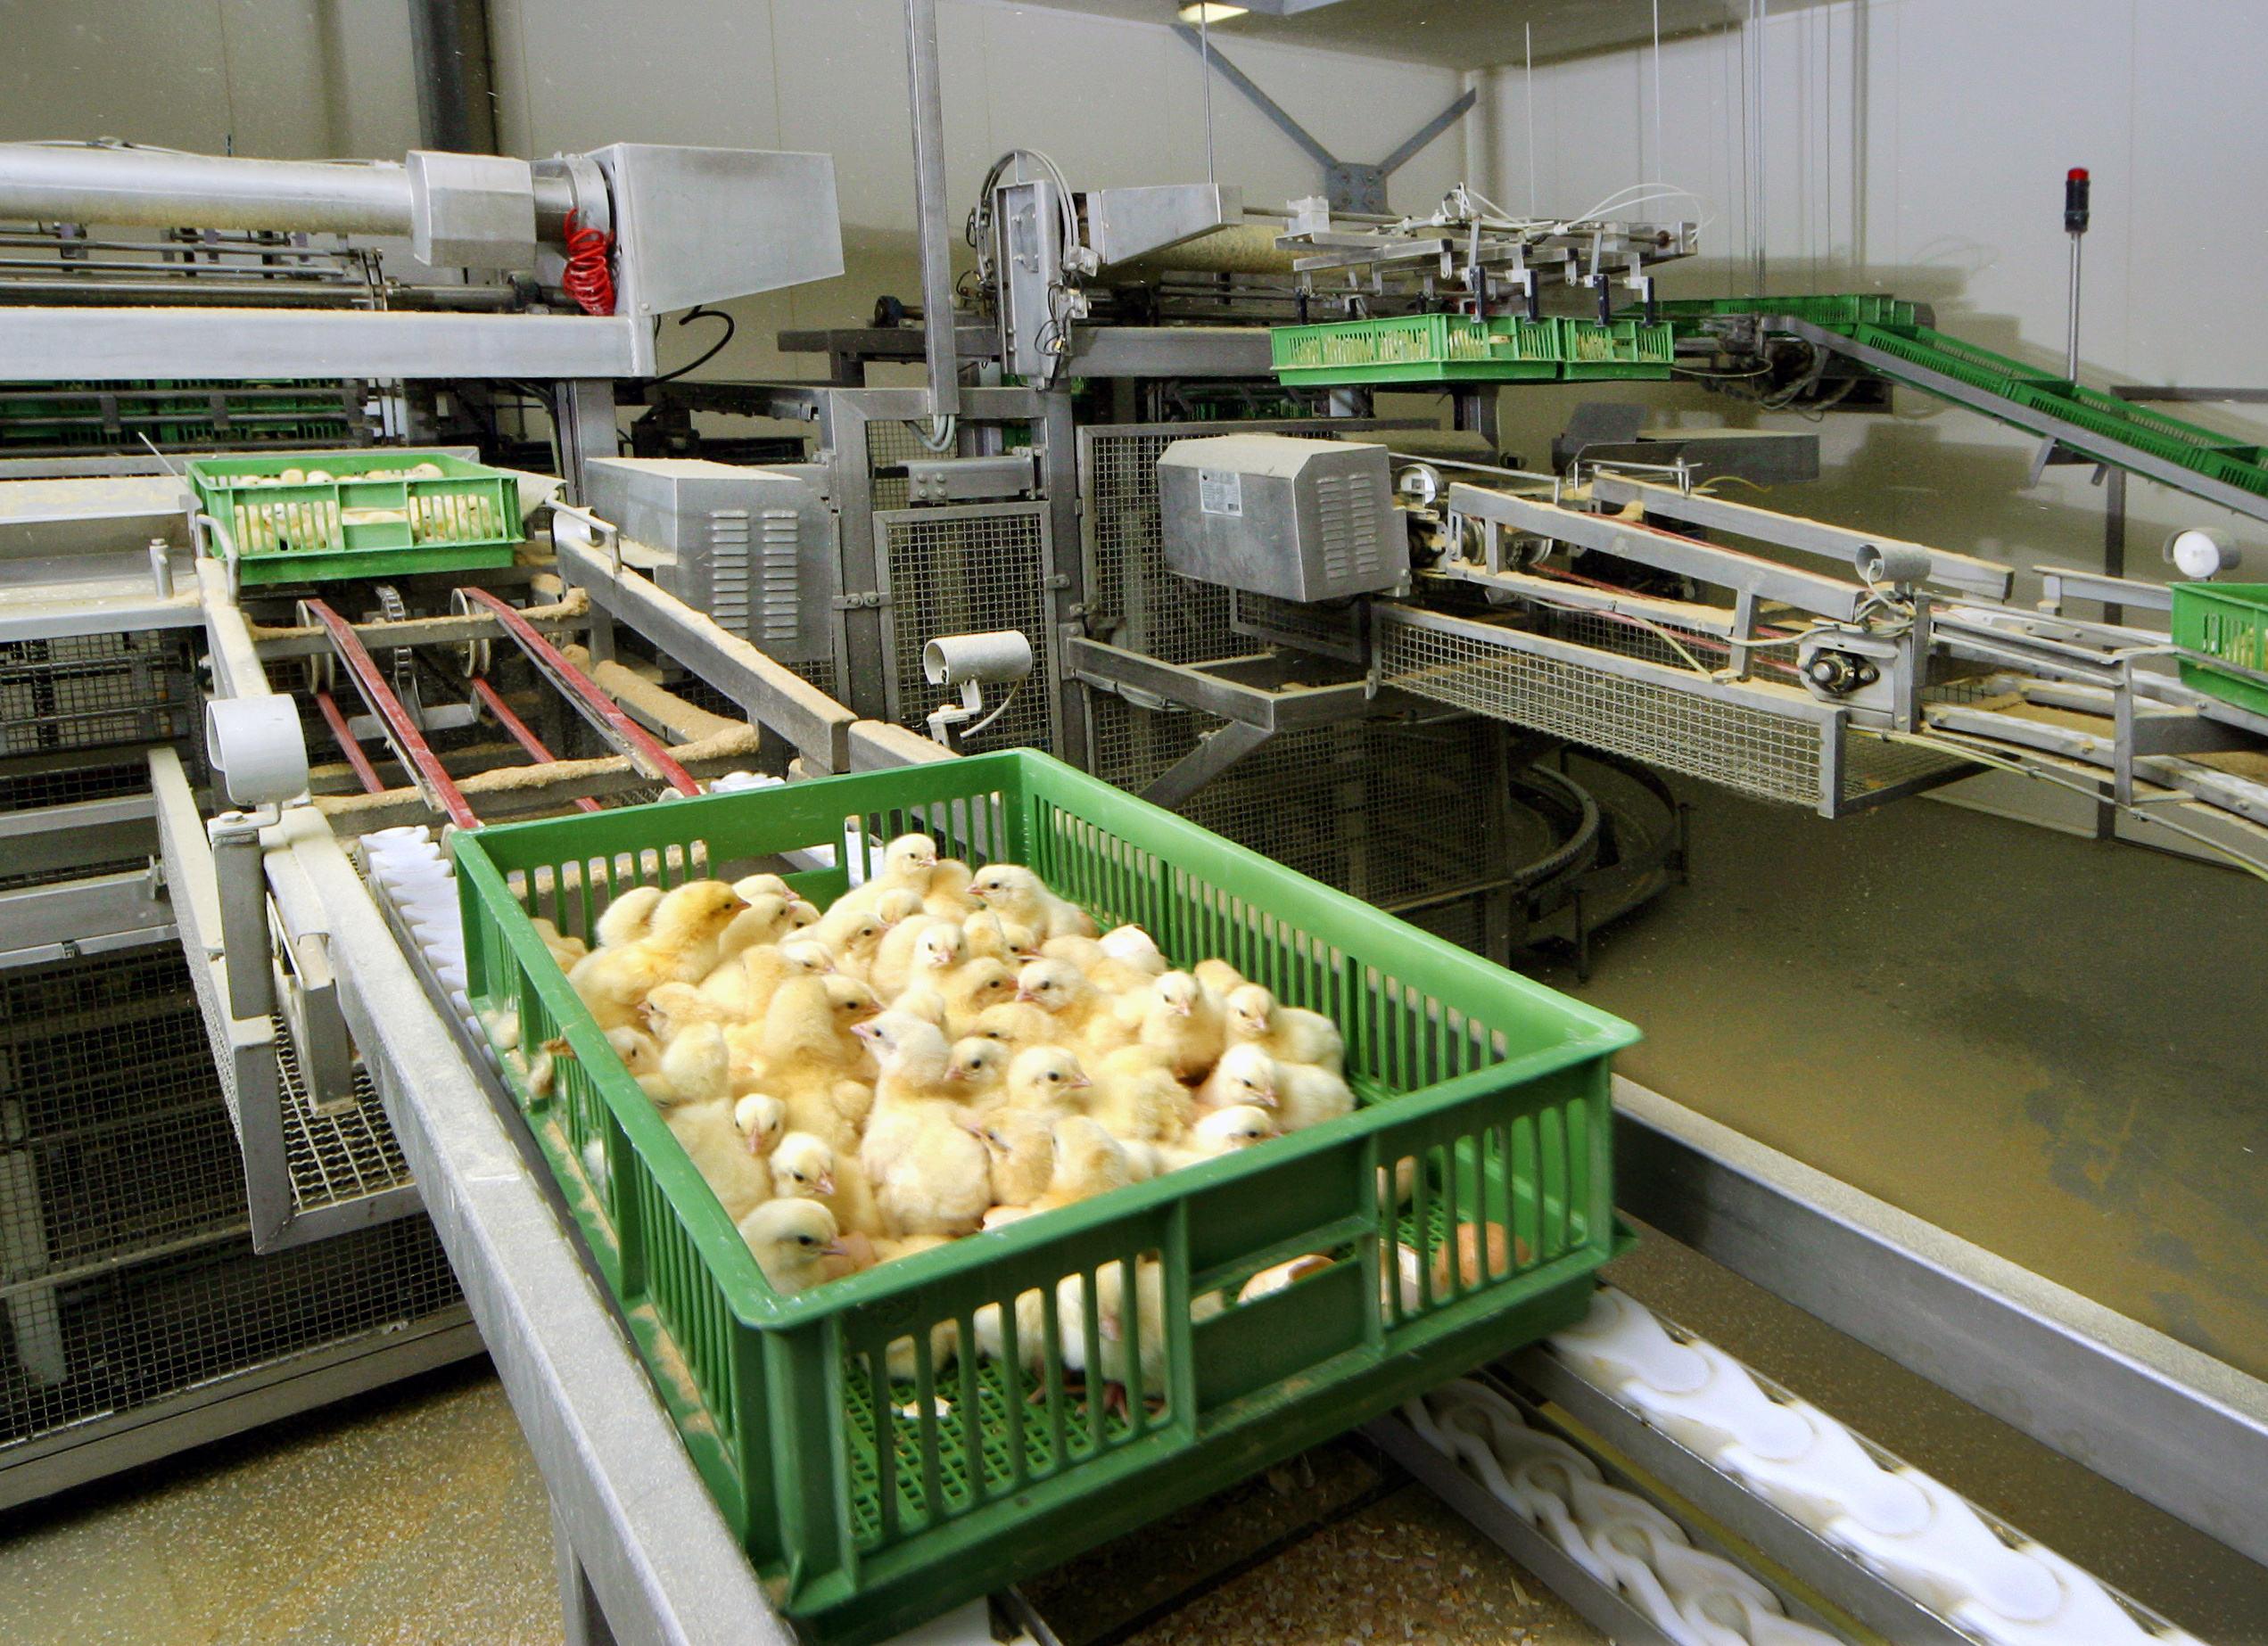 baby chicks in a green basket being moved along a conveyer belt